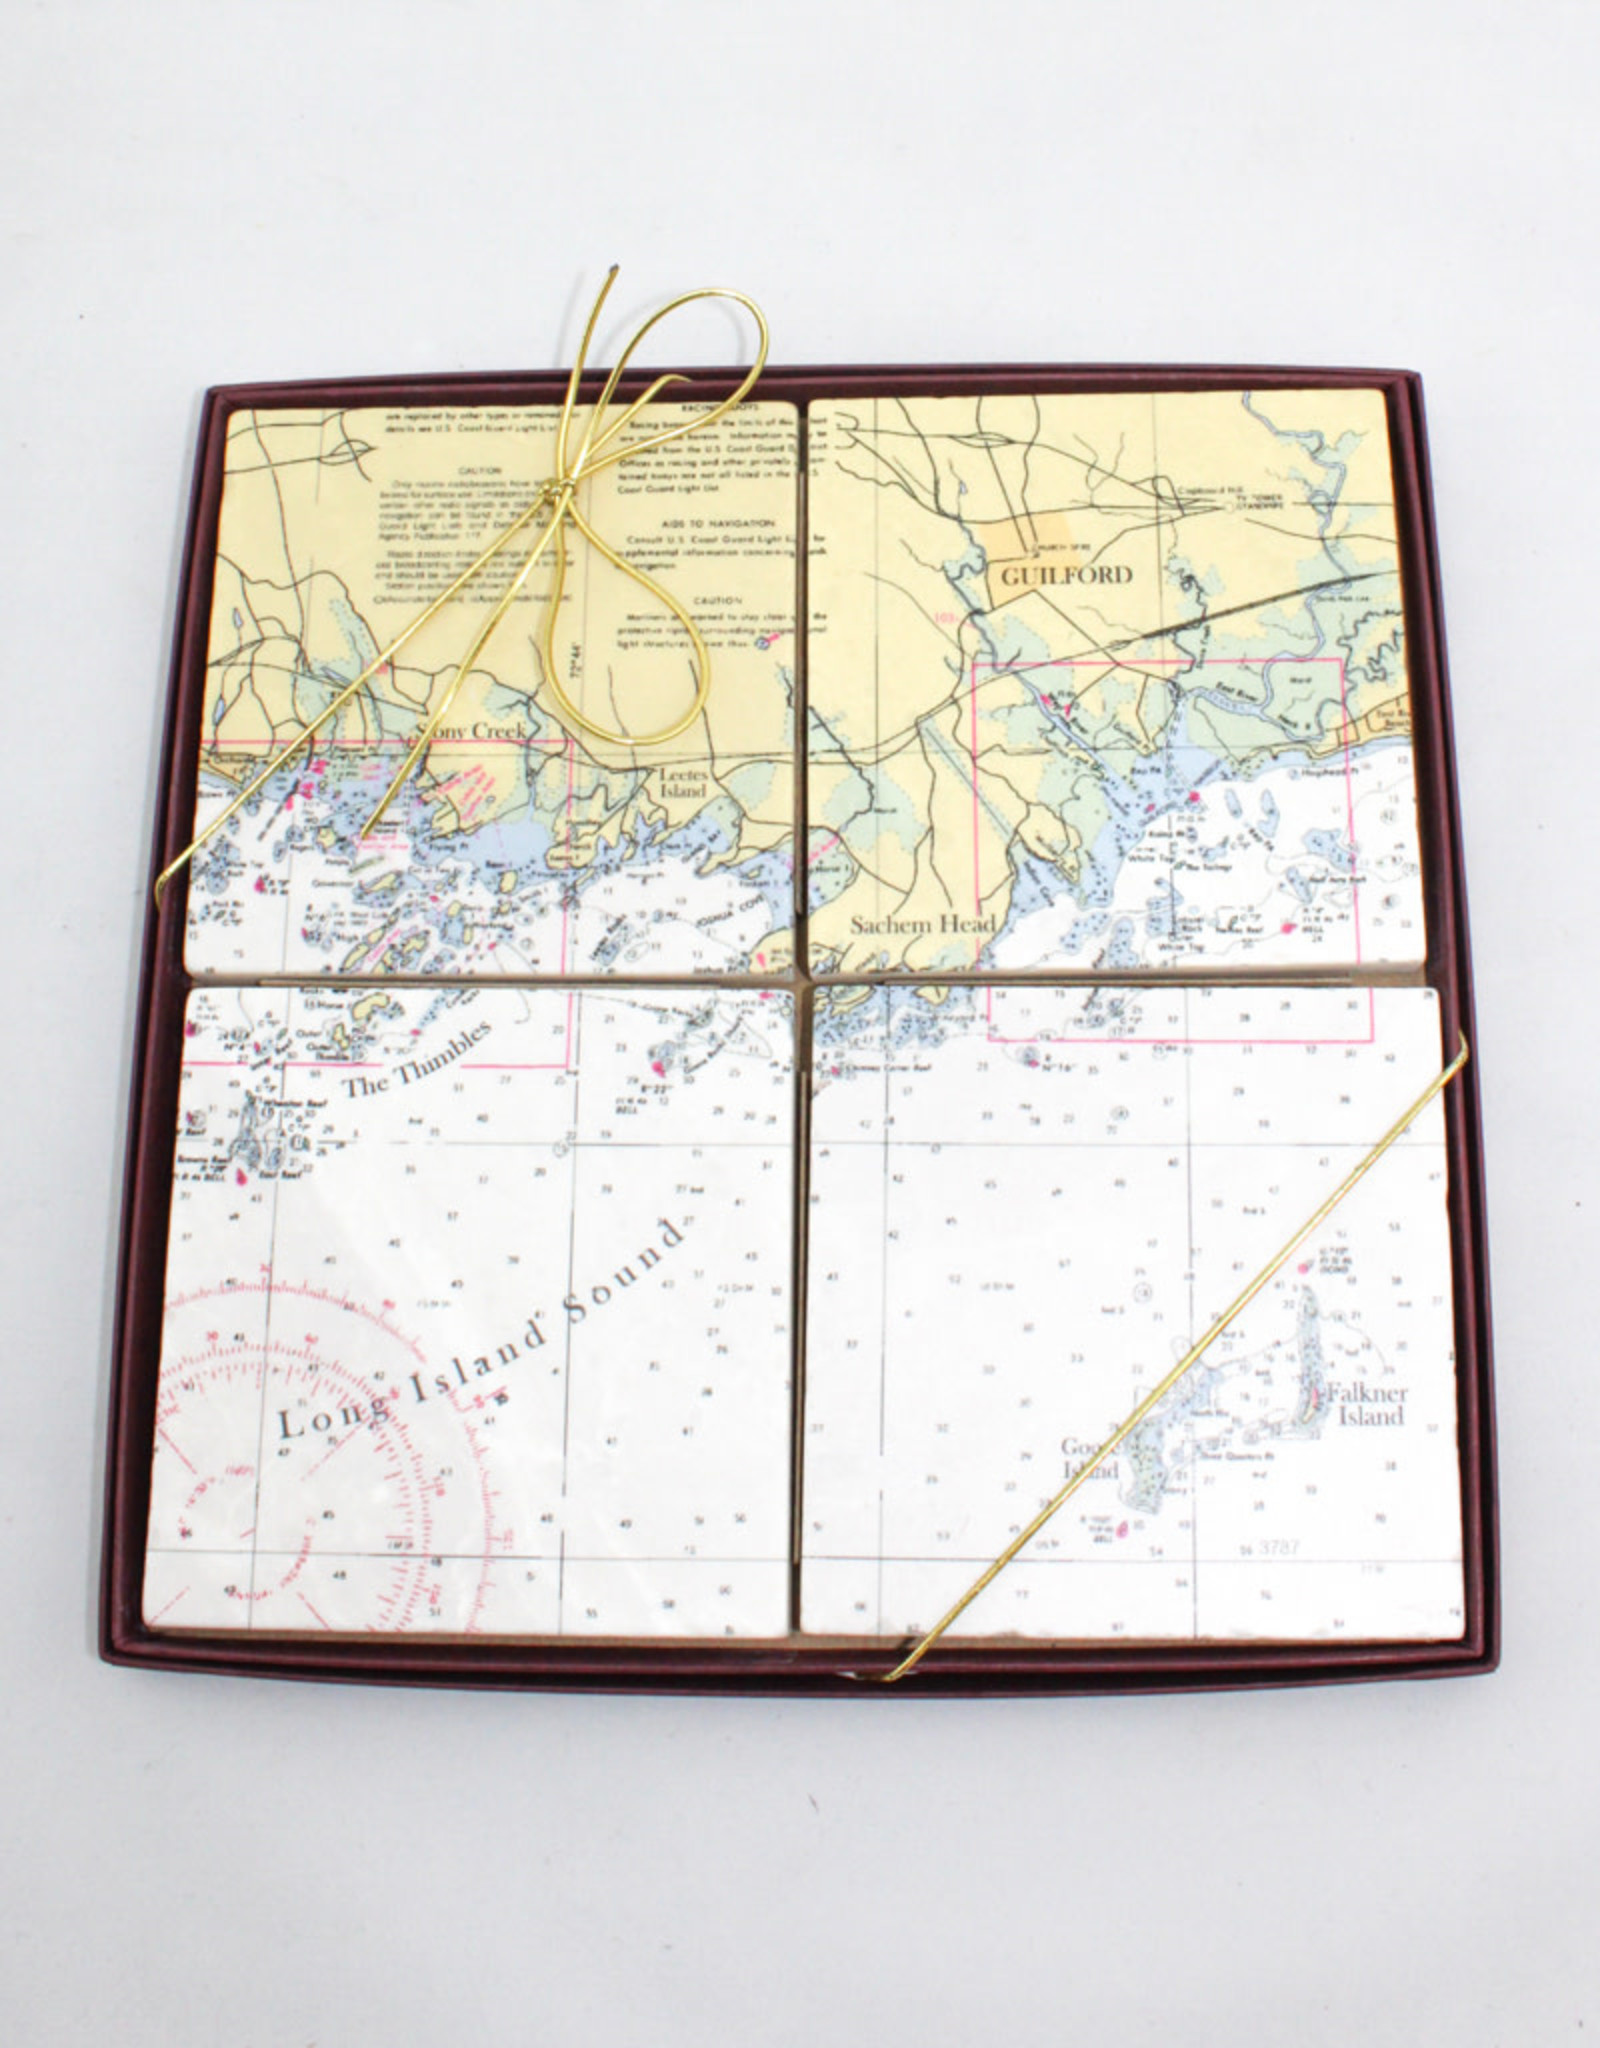 Screen Craft Tile Works Guilford Map tile coasters